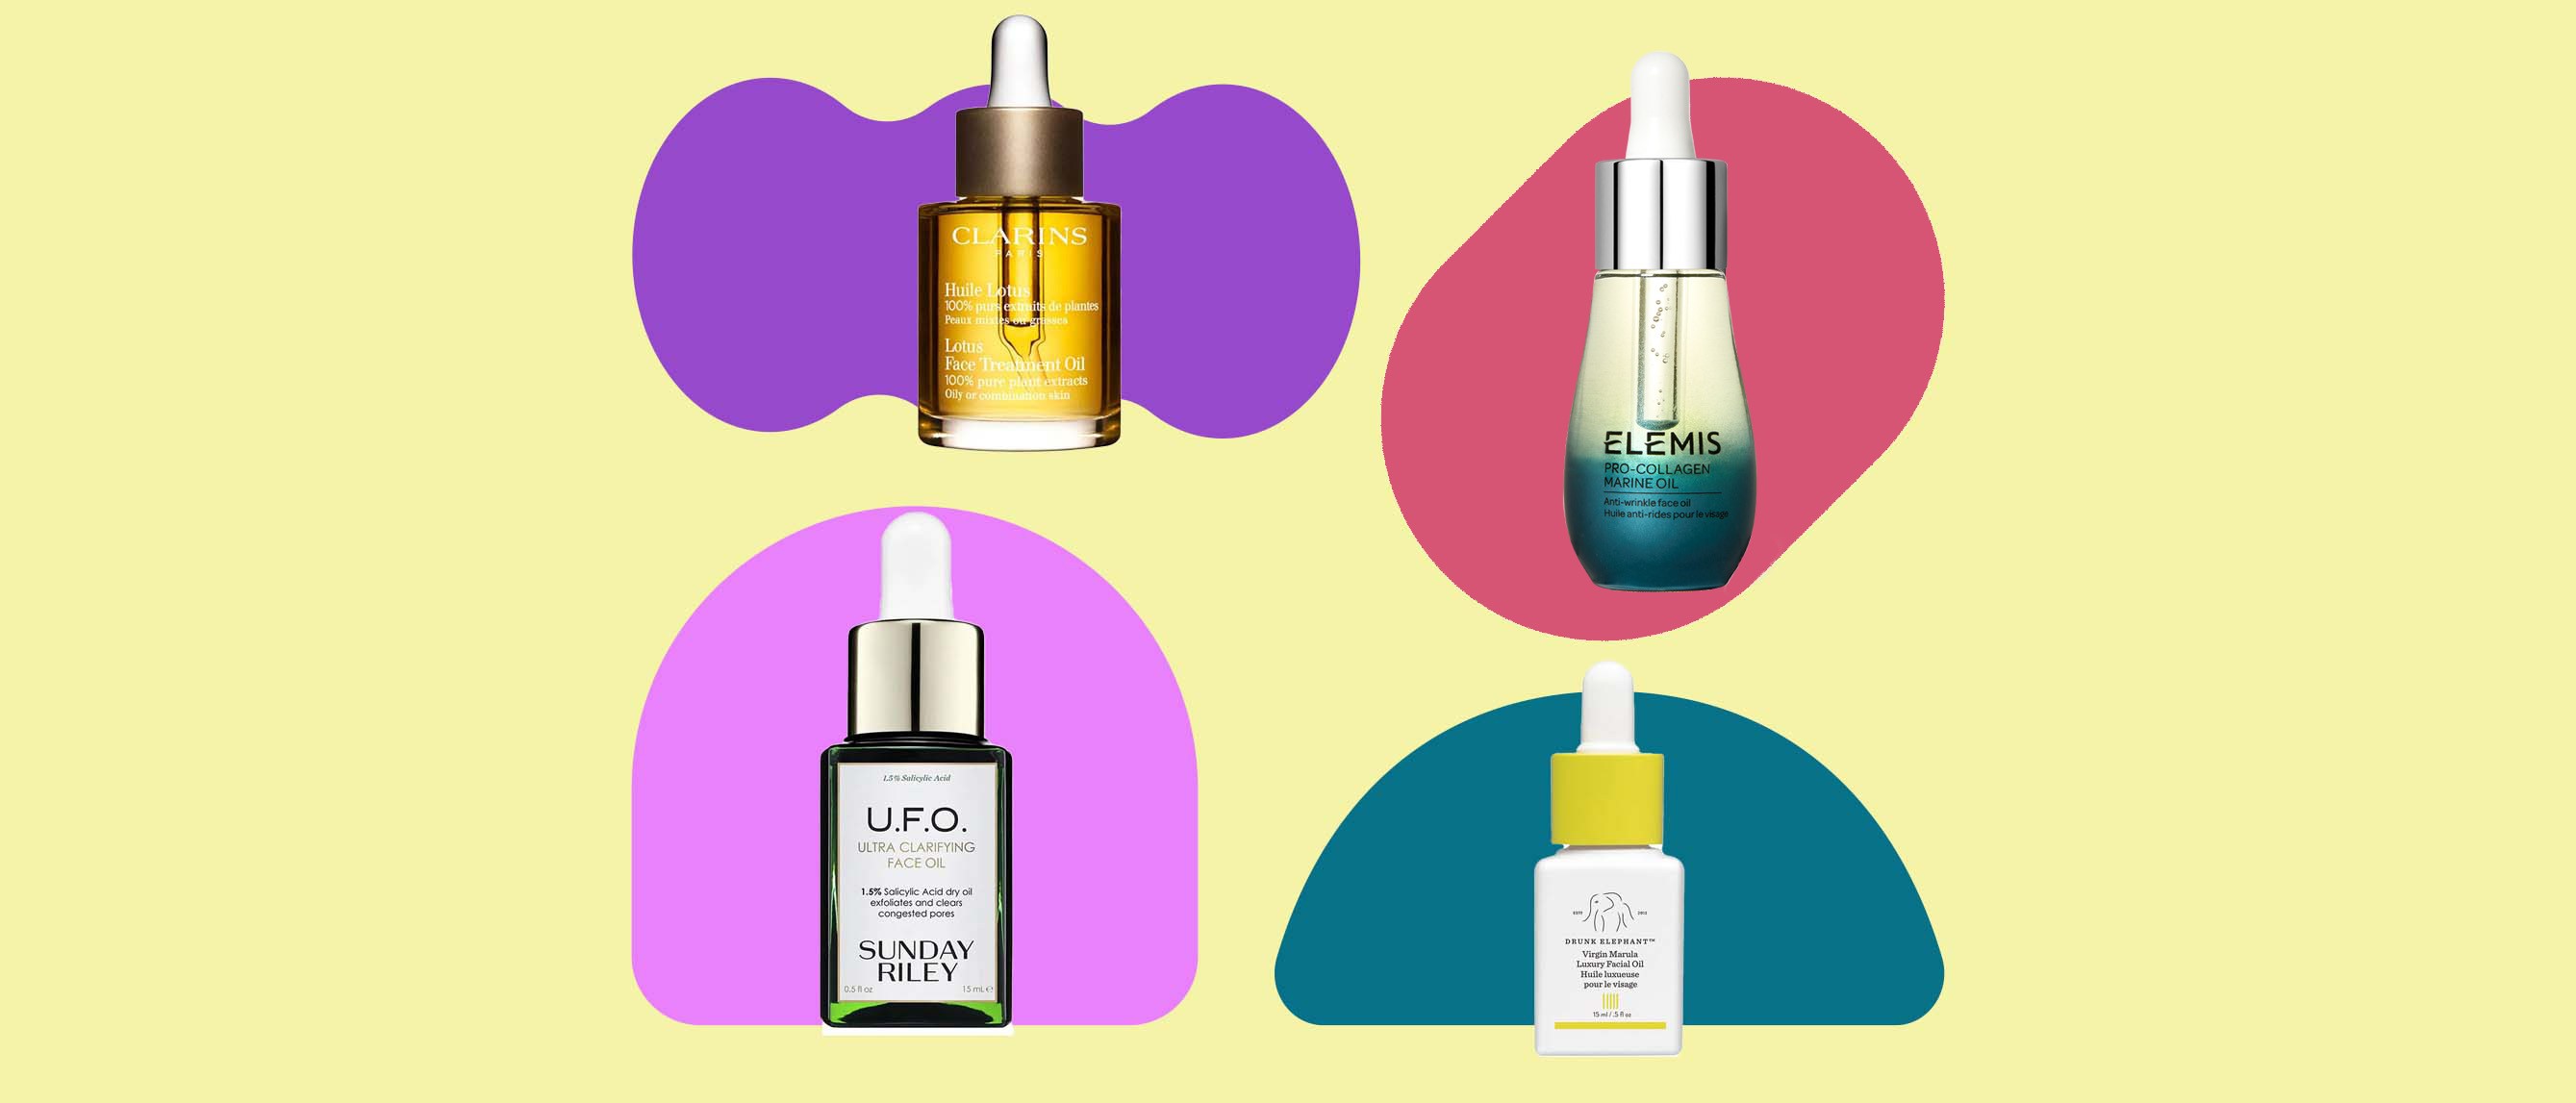 These face oils are best for providing unparalleled radiance